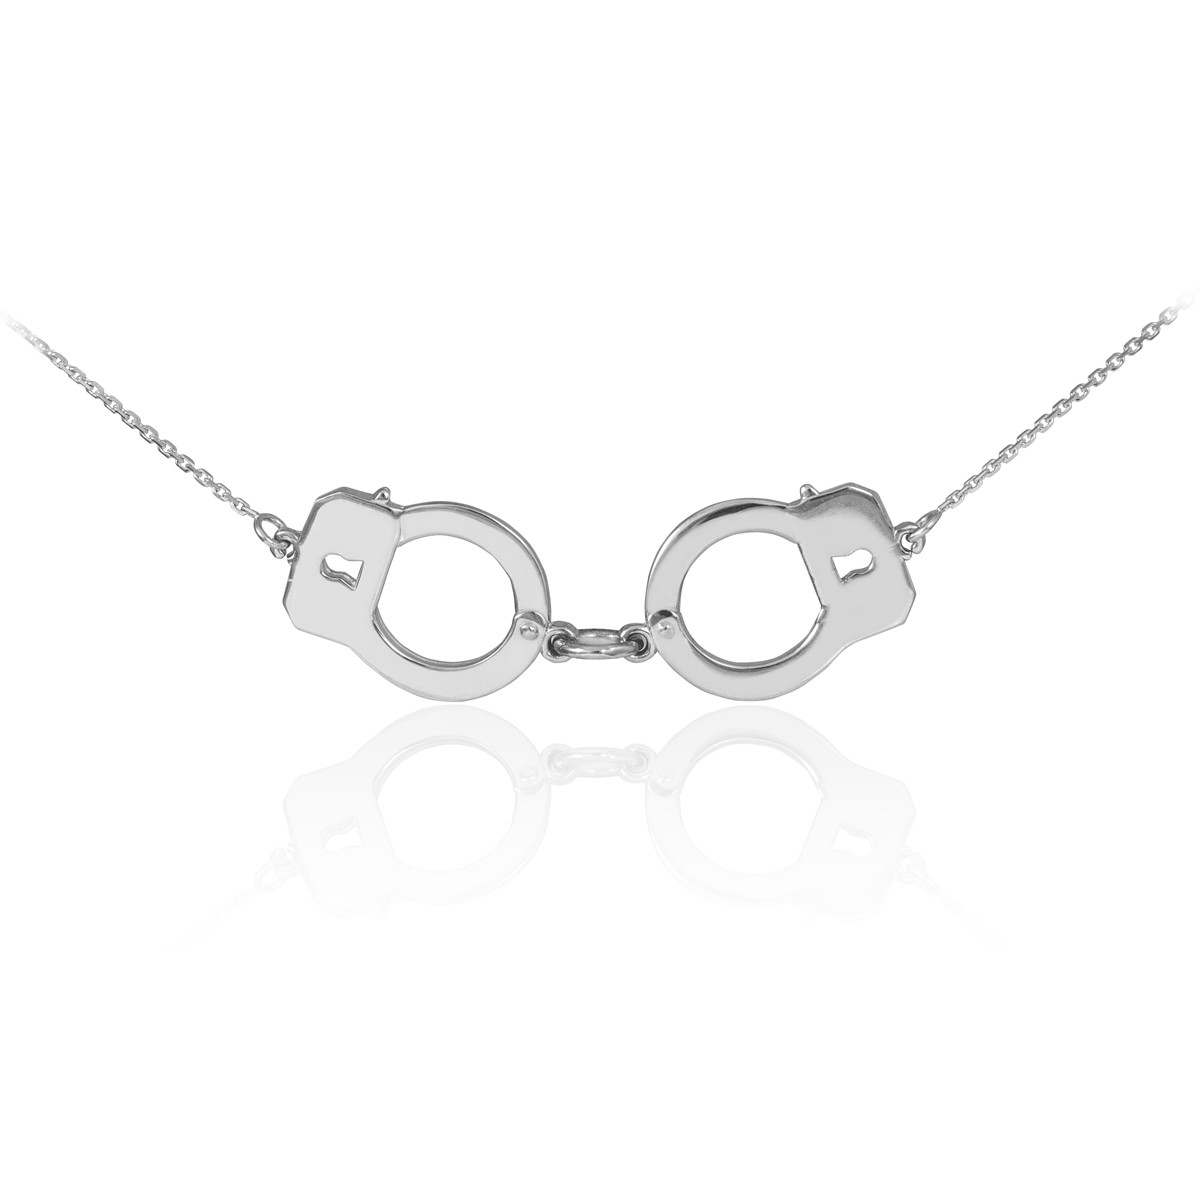 Handcuffs necklace in 14k white gold.